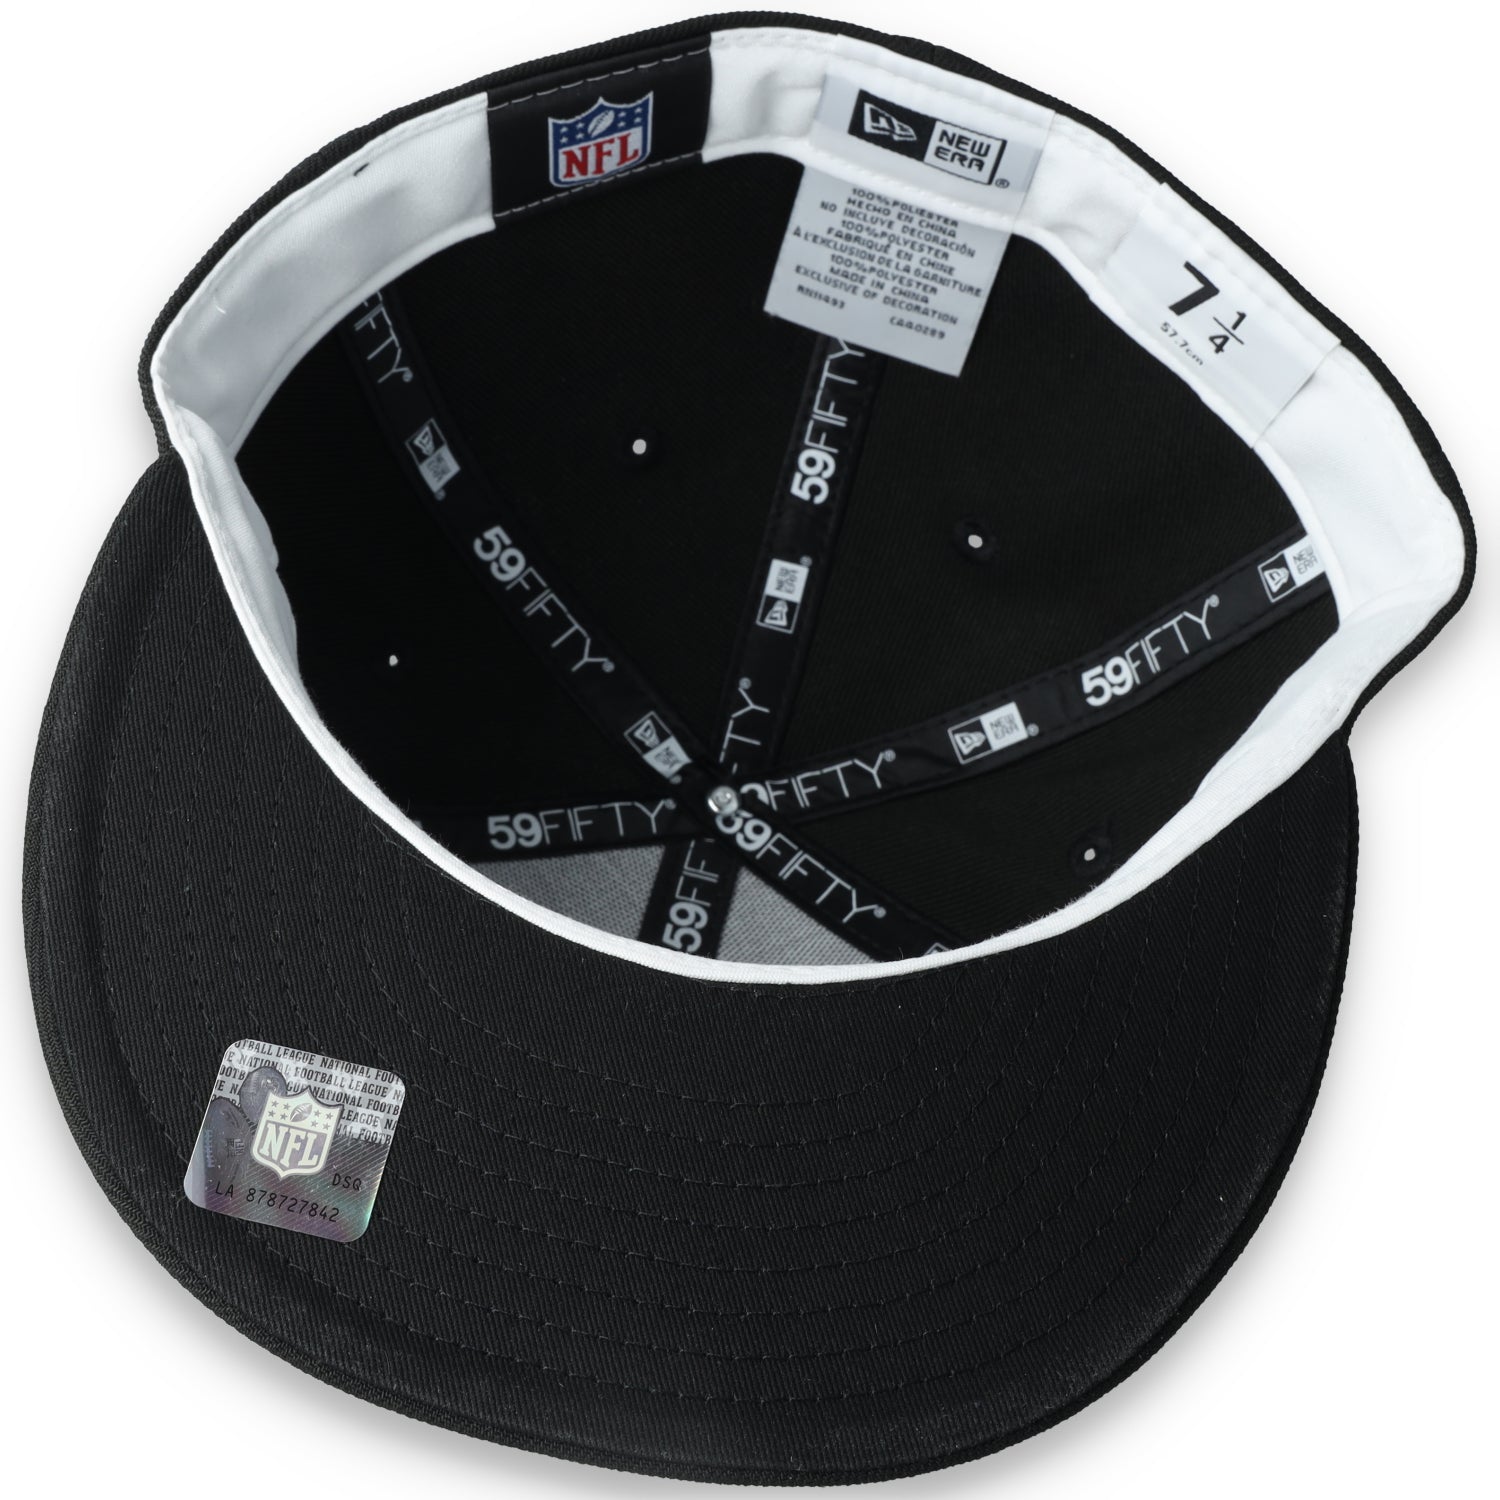 New Era Las Vegas Raiders 60th Anniversary Side Patch Gothic 59FIFTY Fitted Hat